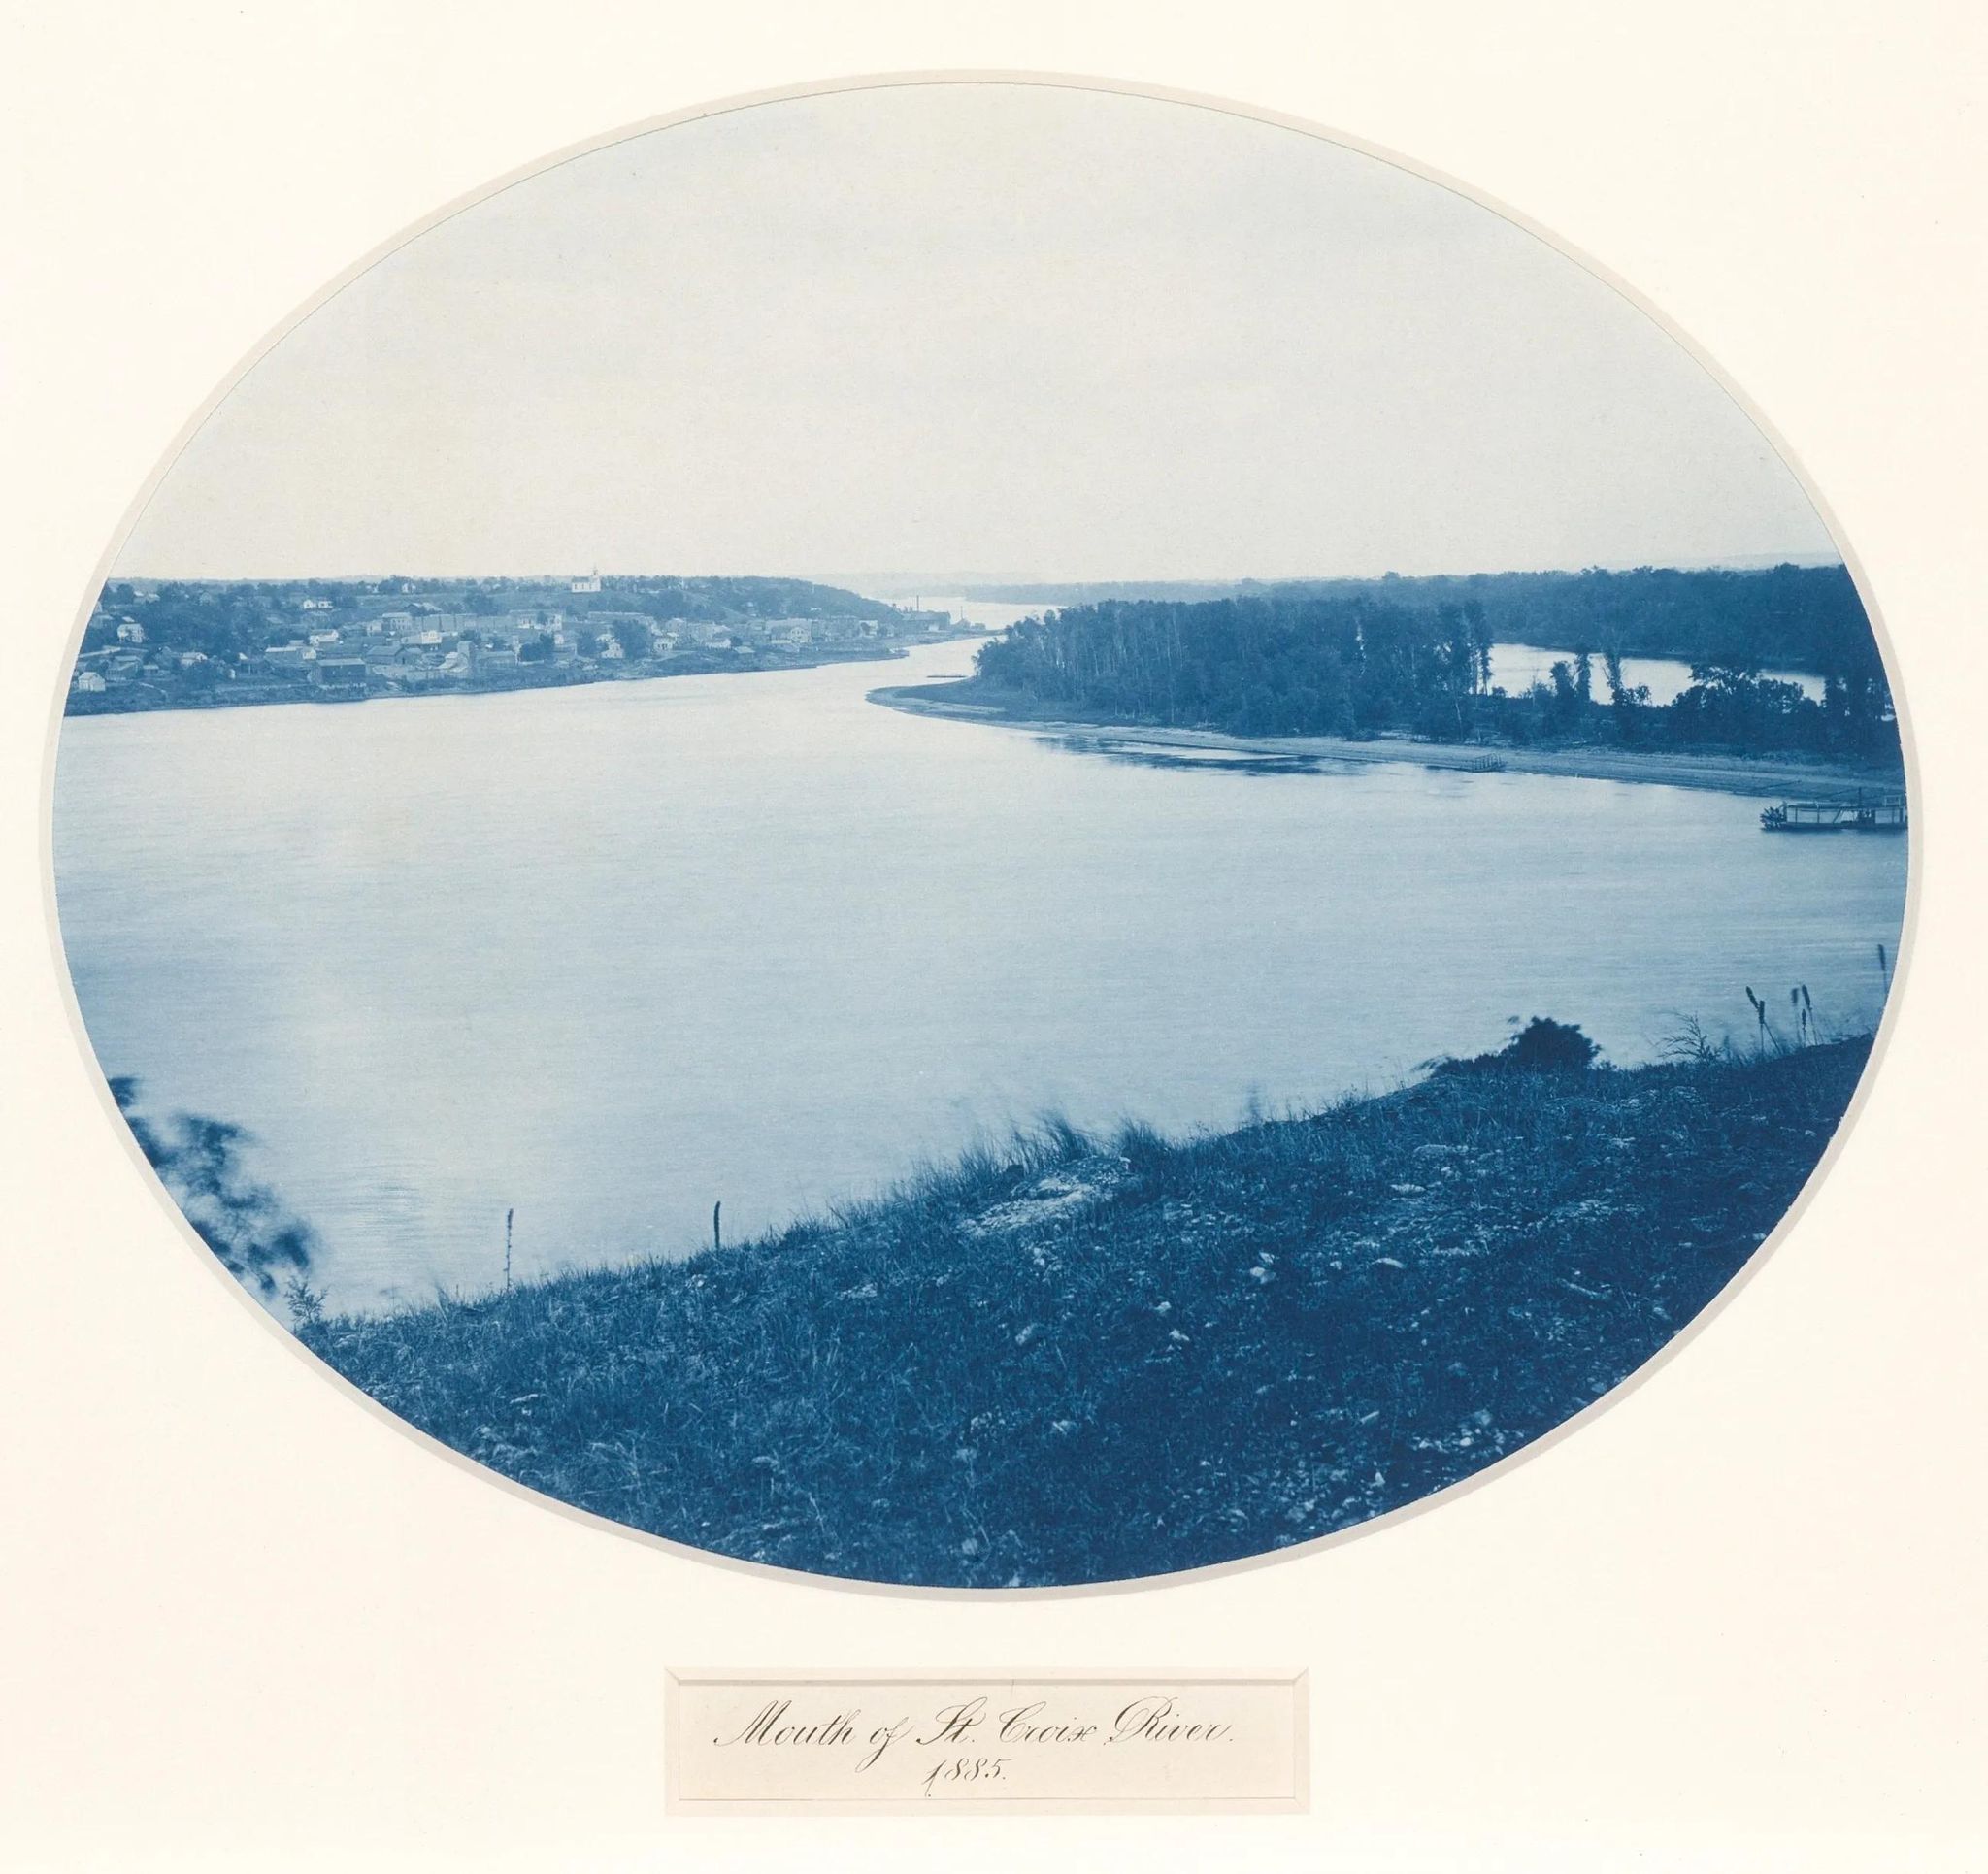 Mouth of the St. Croix River, from the series Upper Mississippi River, Views, Volume I